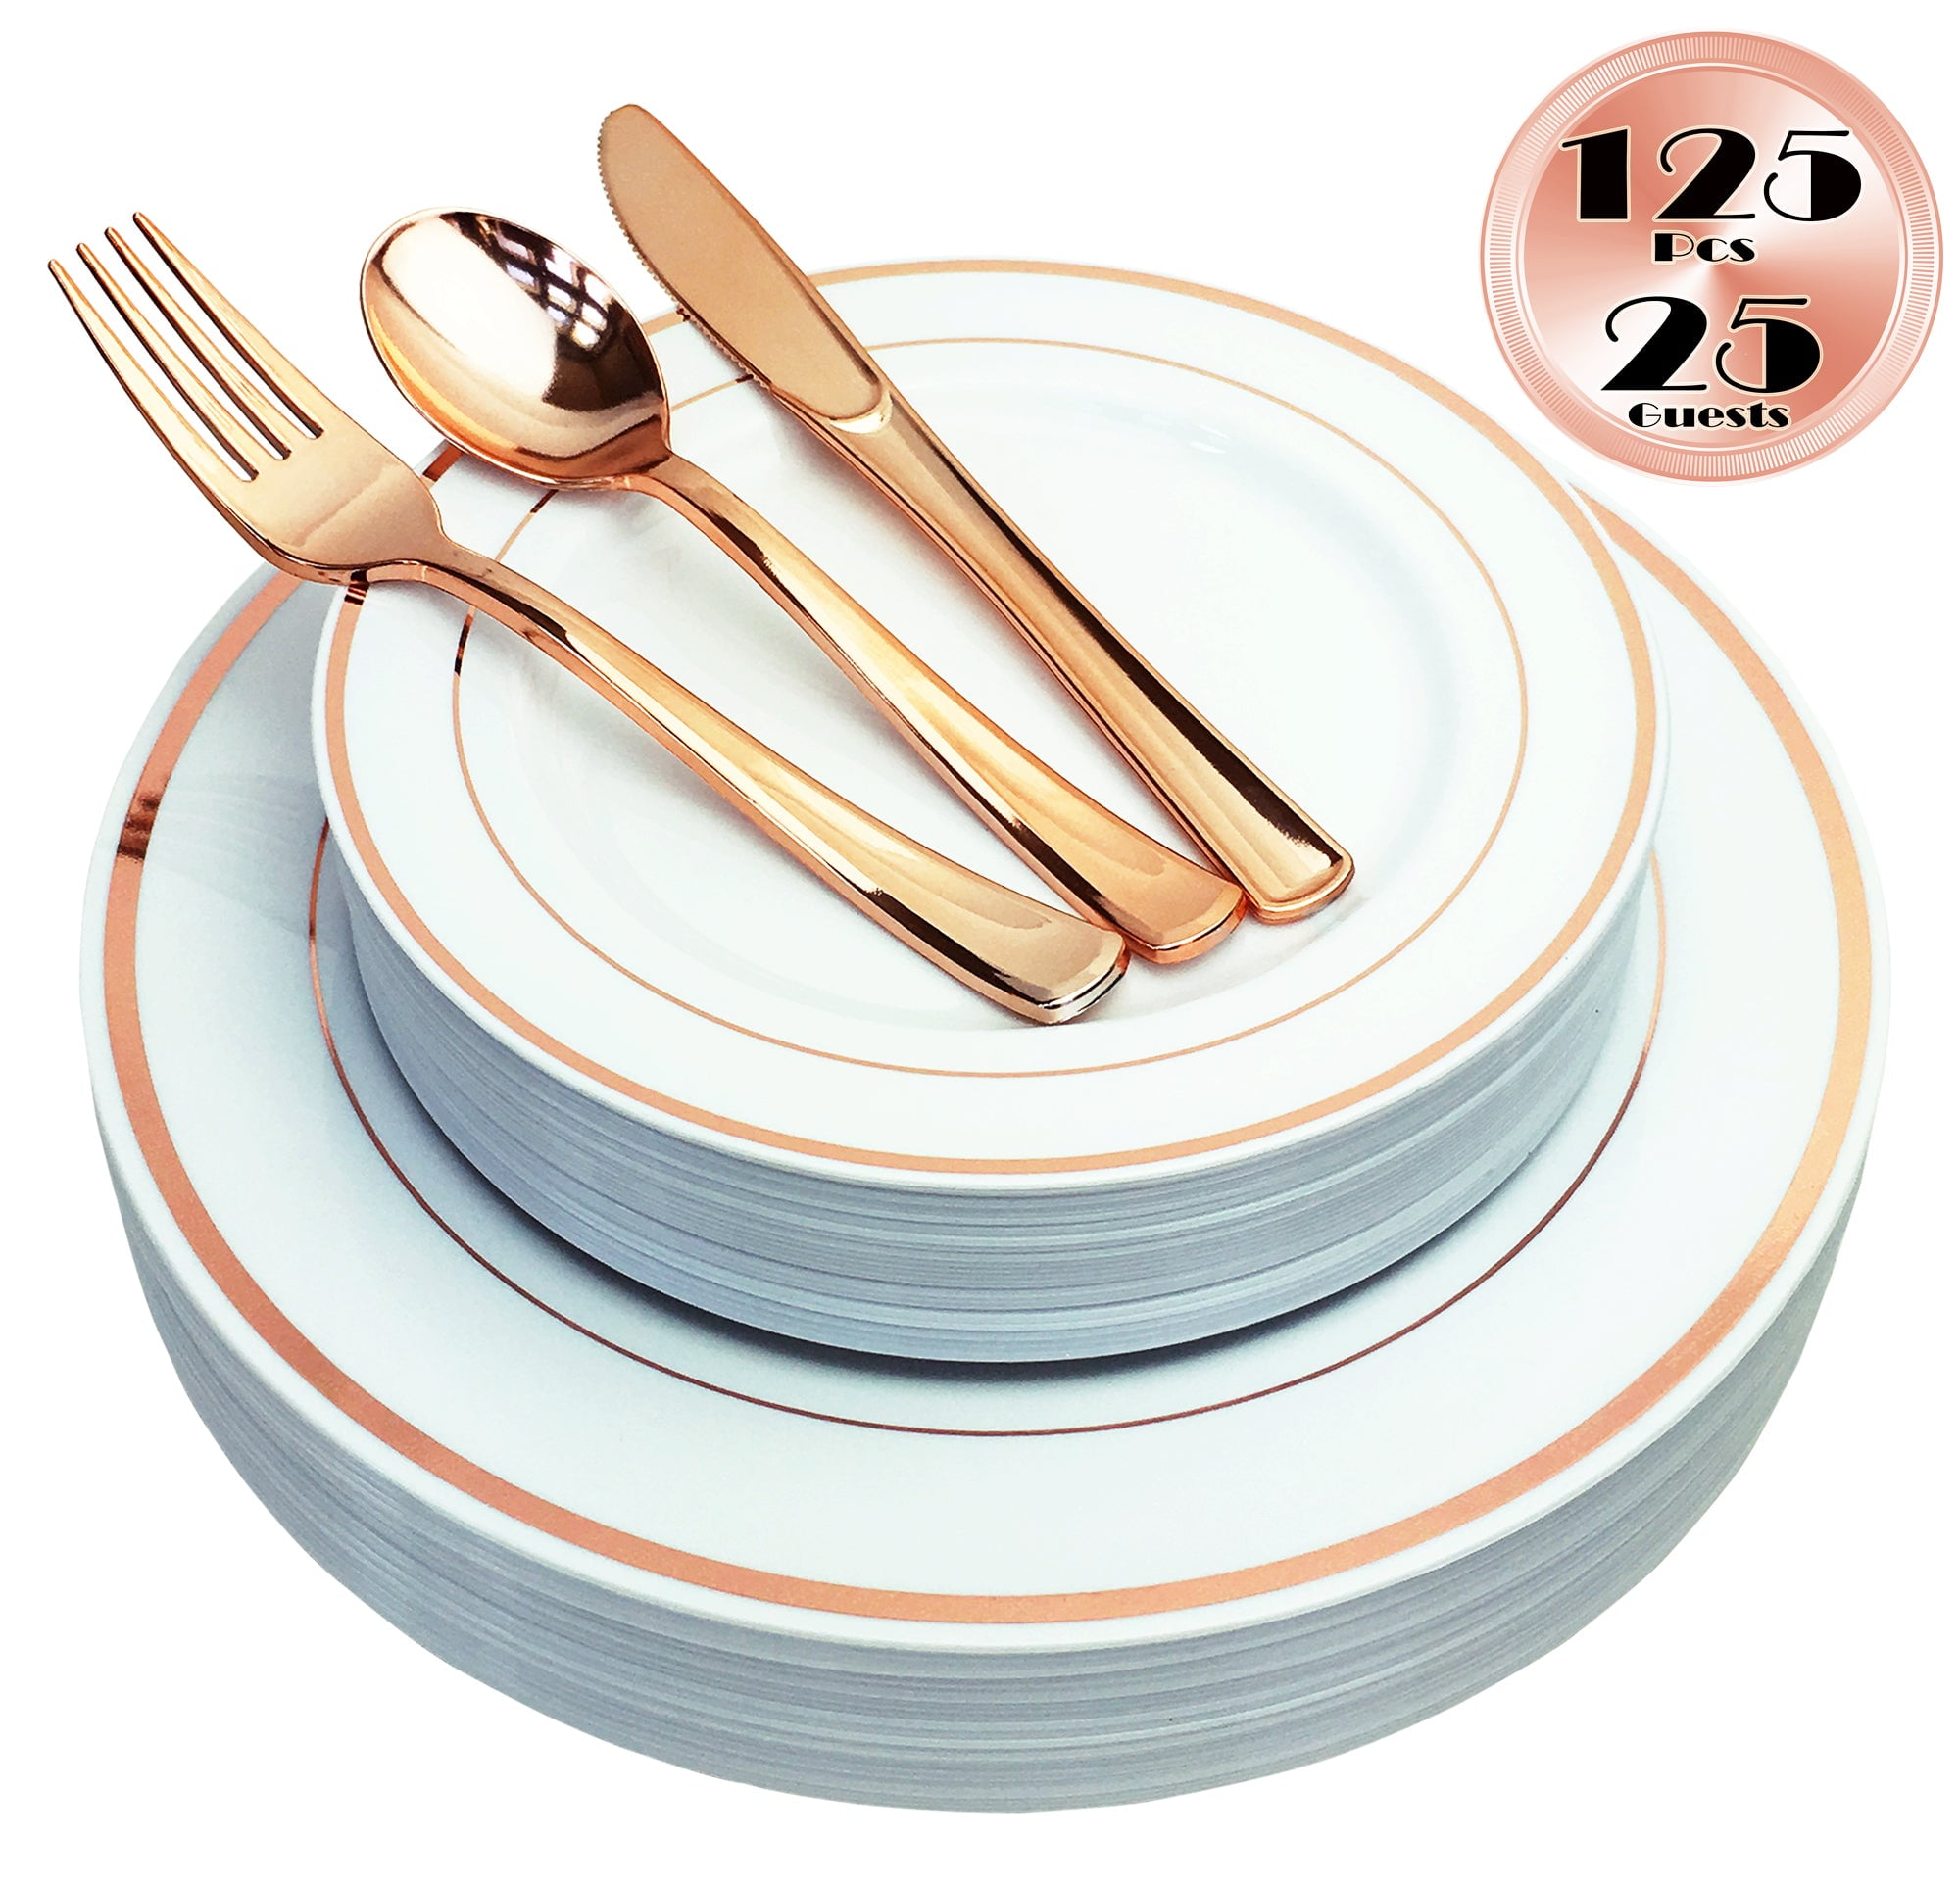 Plastic ROSE ROSE GOLD FORKS Disposable TABLEWARE Party Wedding Buffet SALE